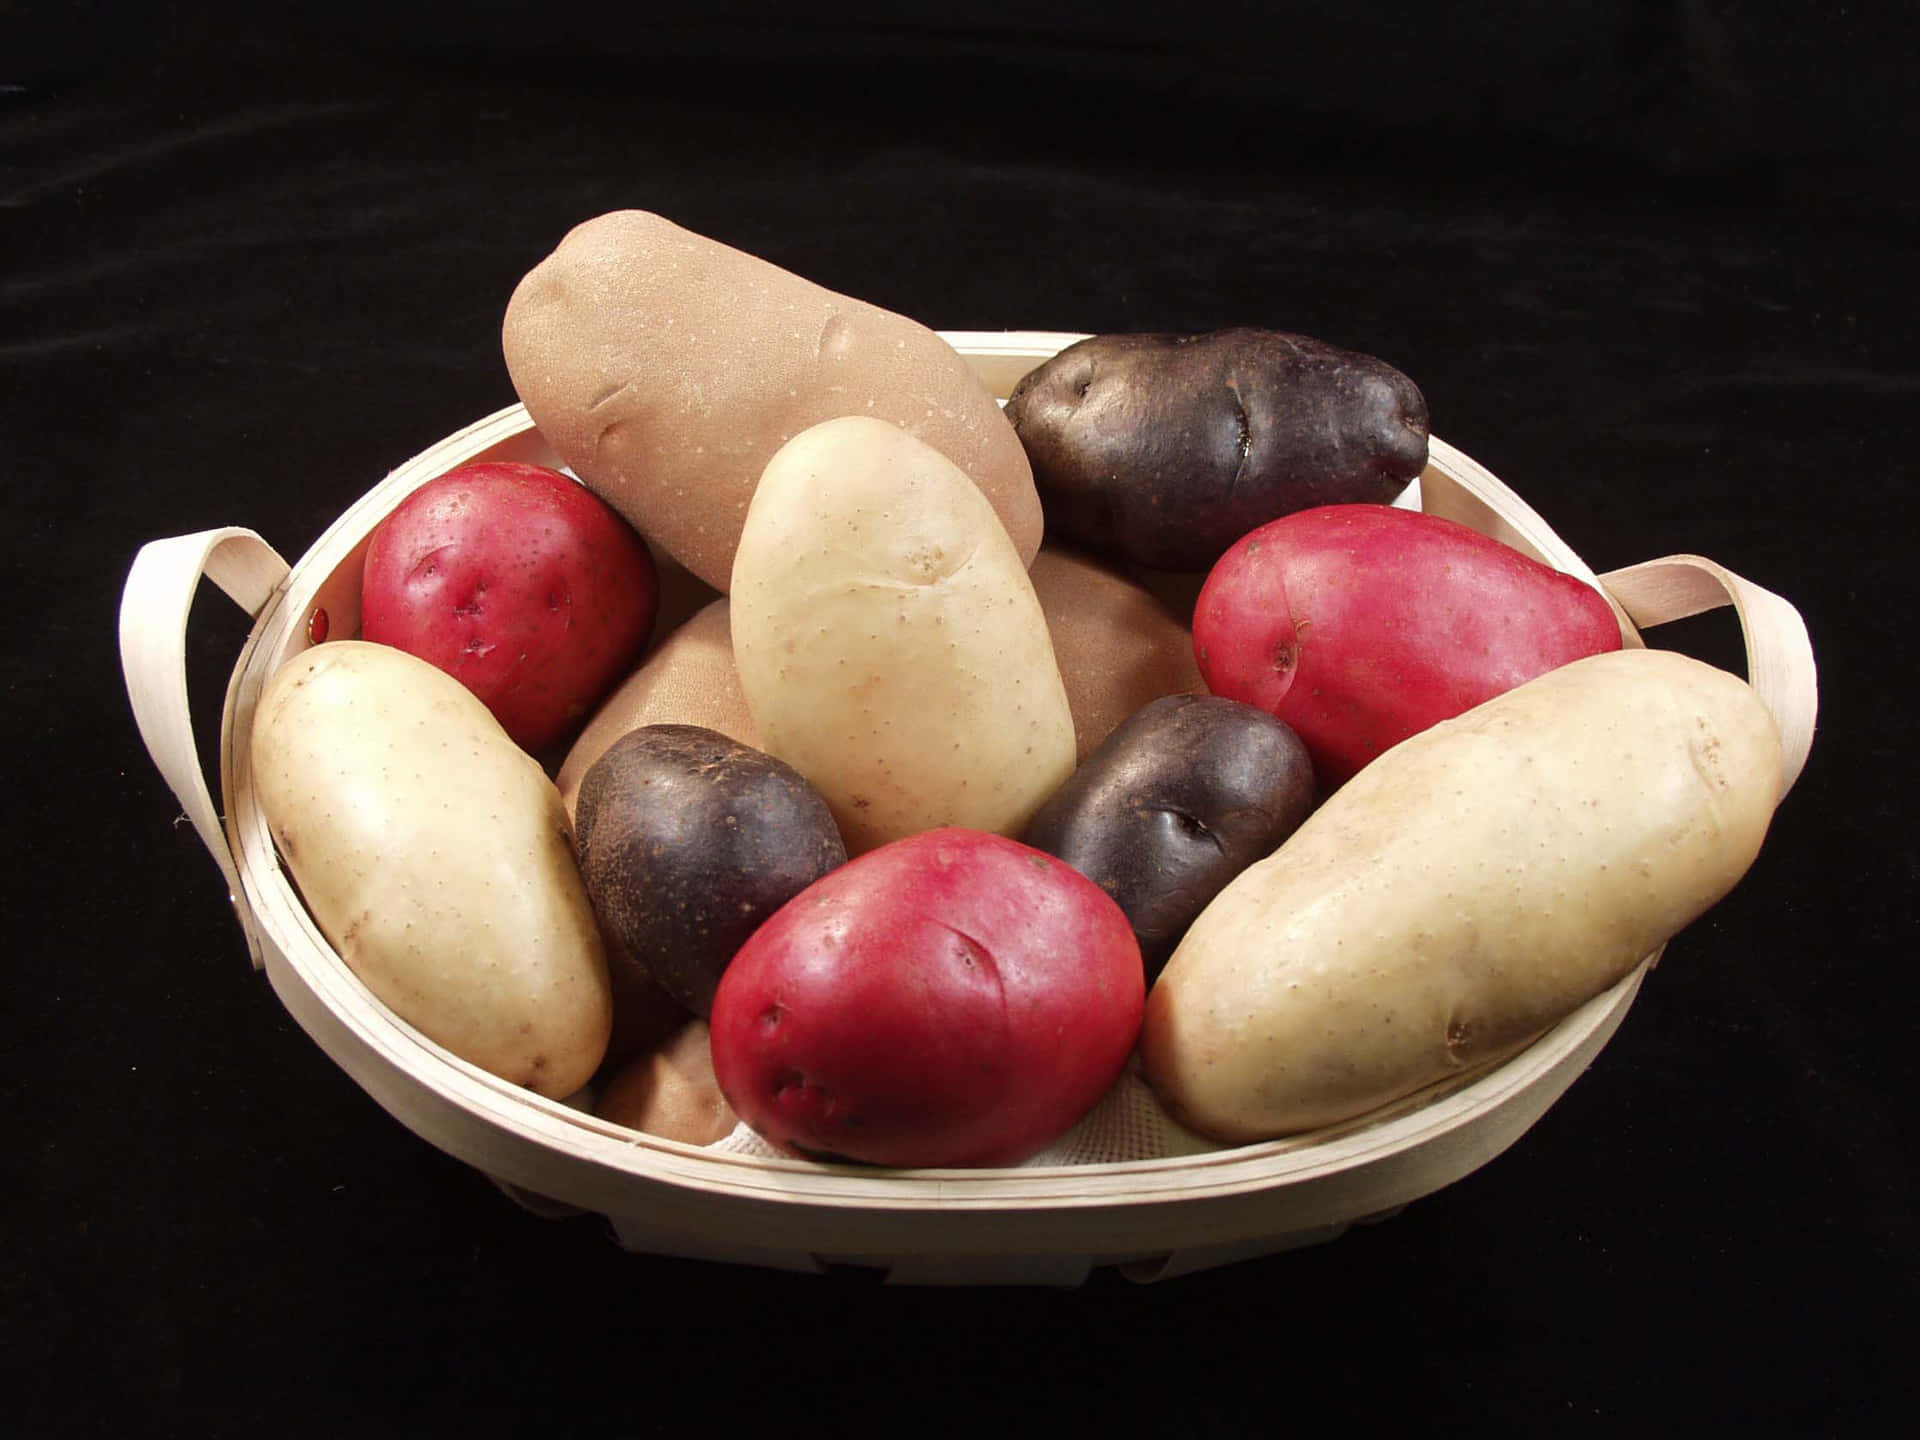 A Pile of Fresh Red Potatoes Wallpaper